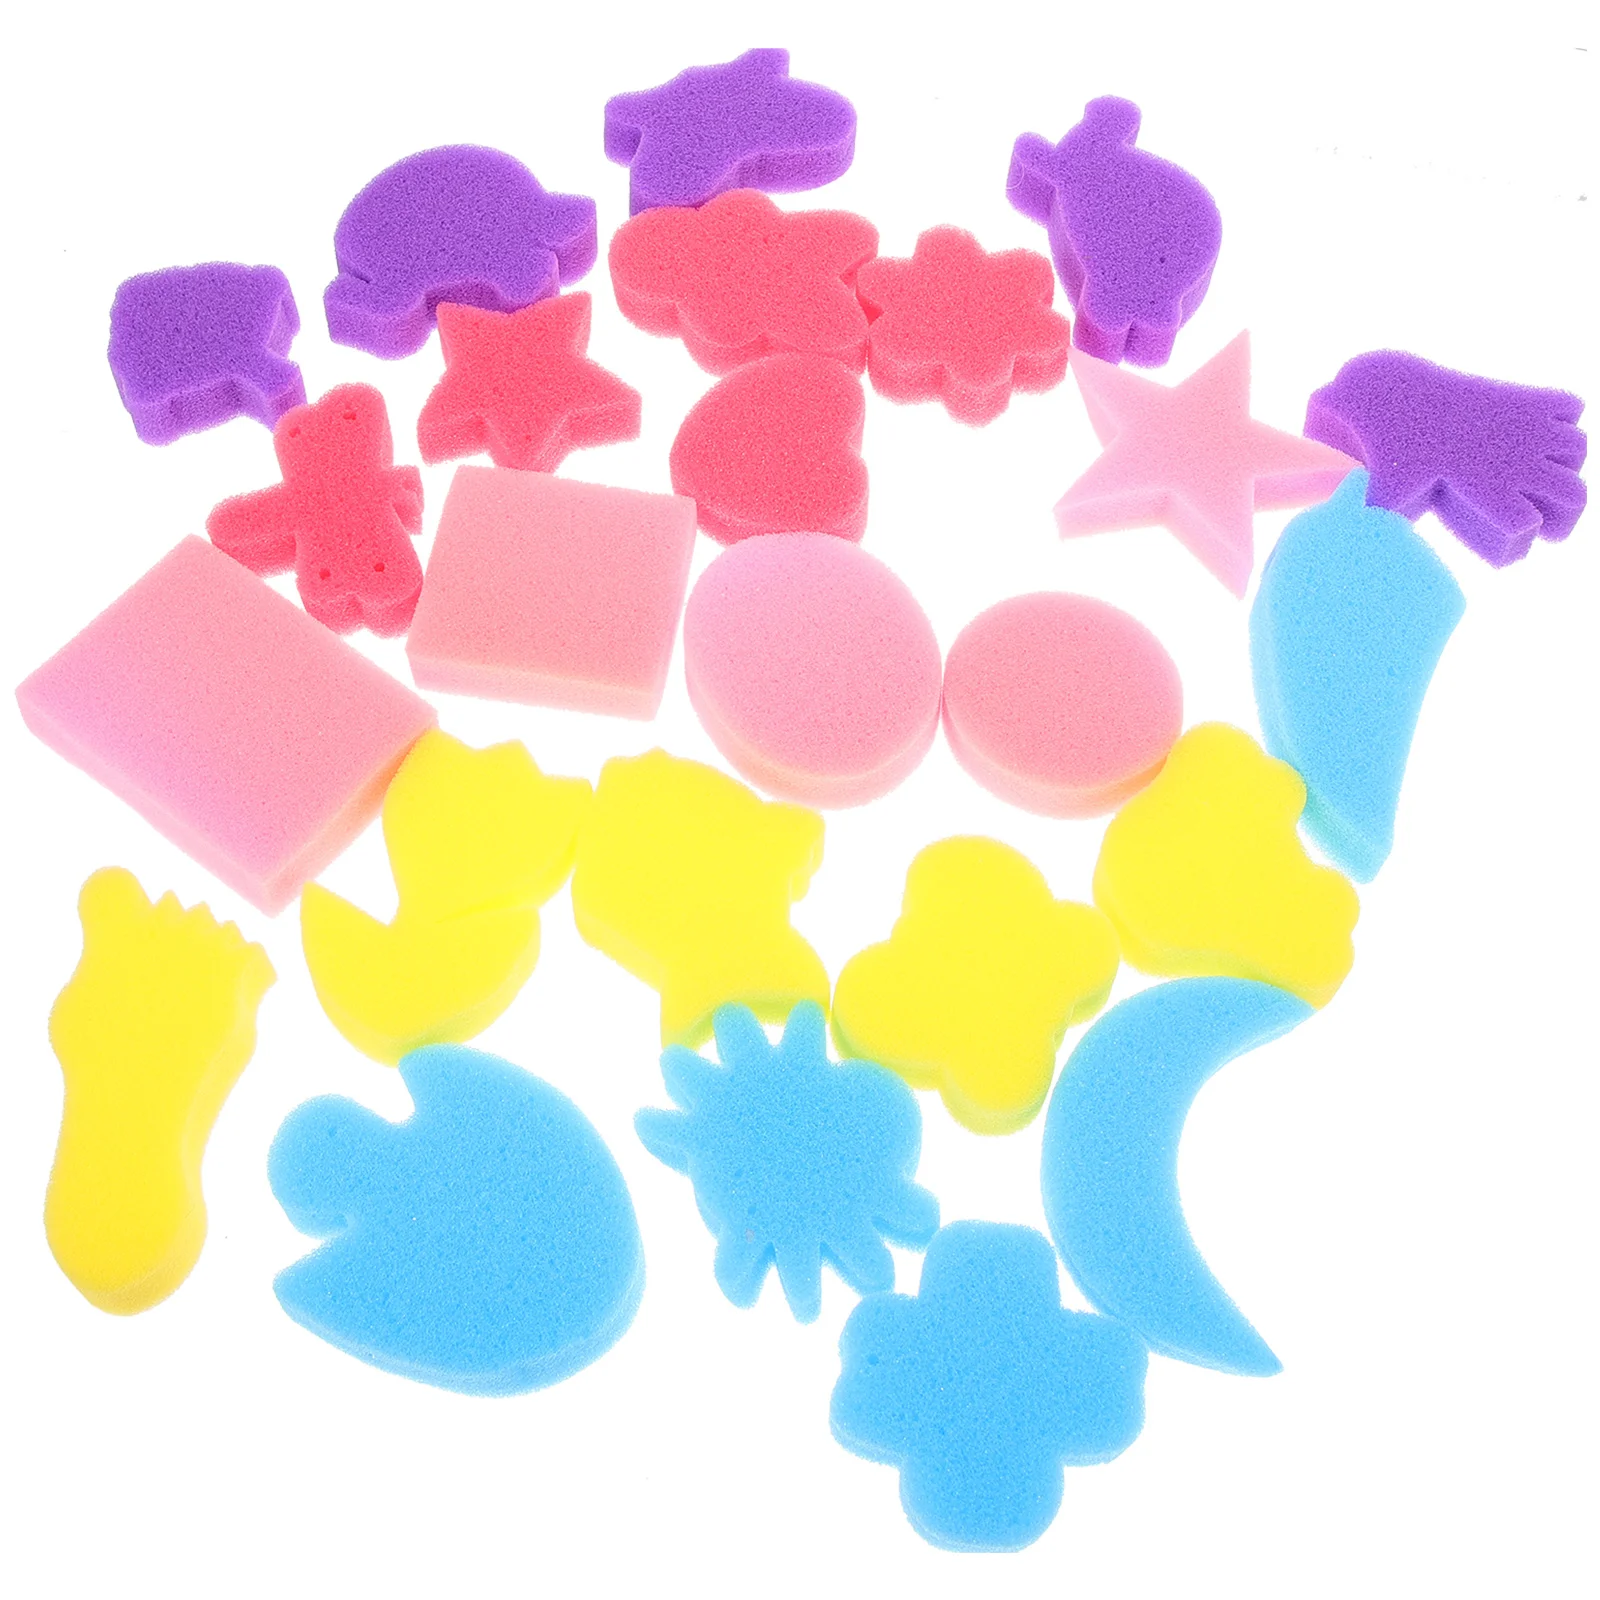 DIY Painting Sponges, 30pcs Assorted Pattern and Color Graffiti Sponges Painting Tools for Graffiti Drawing Painting|7x7x0 8 pcs painting brush plastic handle kid color diy painting washing graffiti tools early education creative toys random color